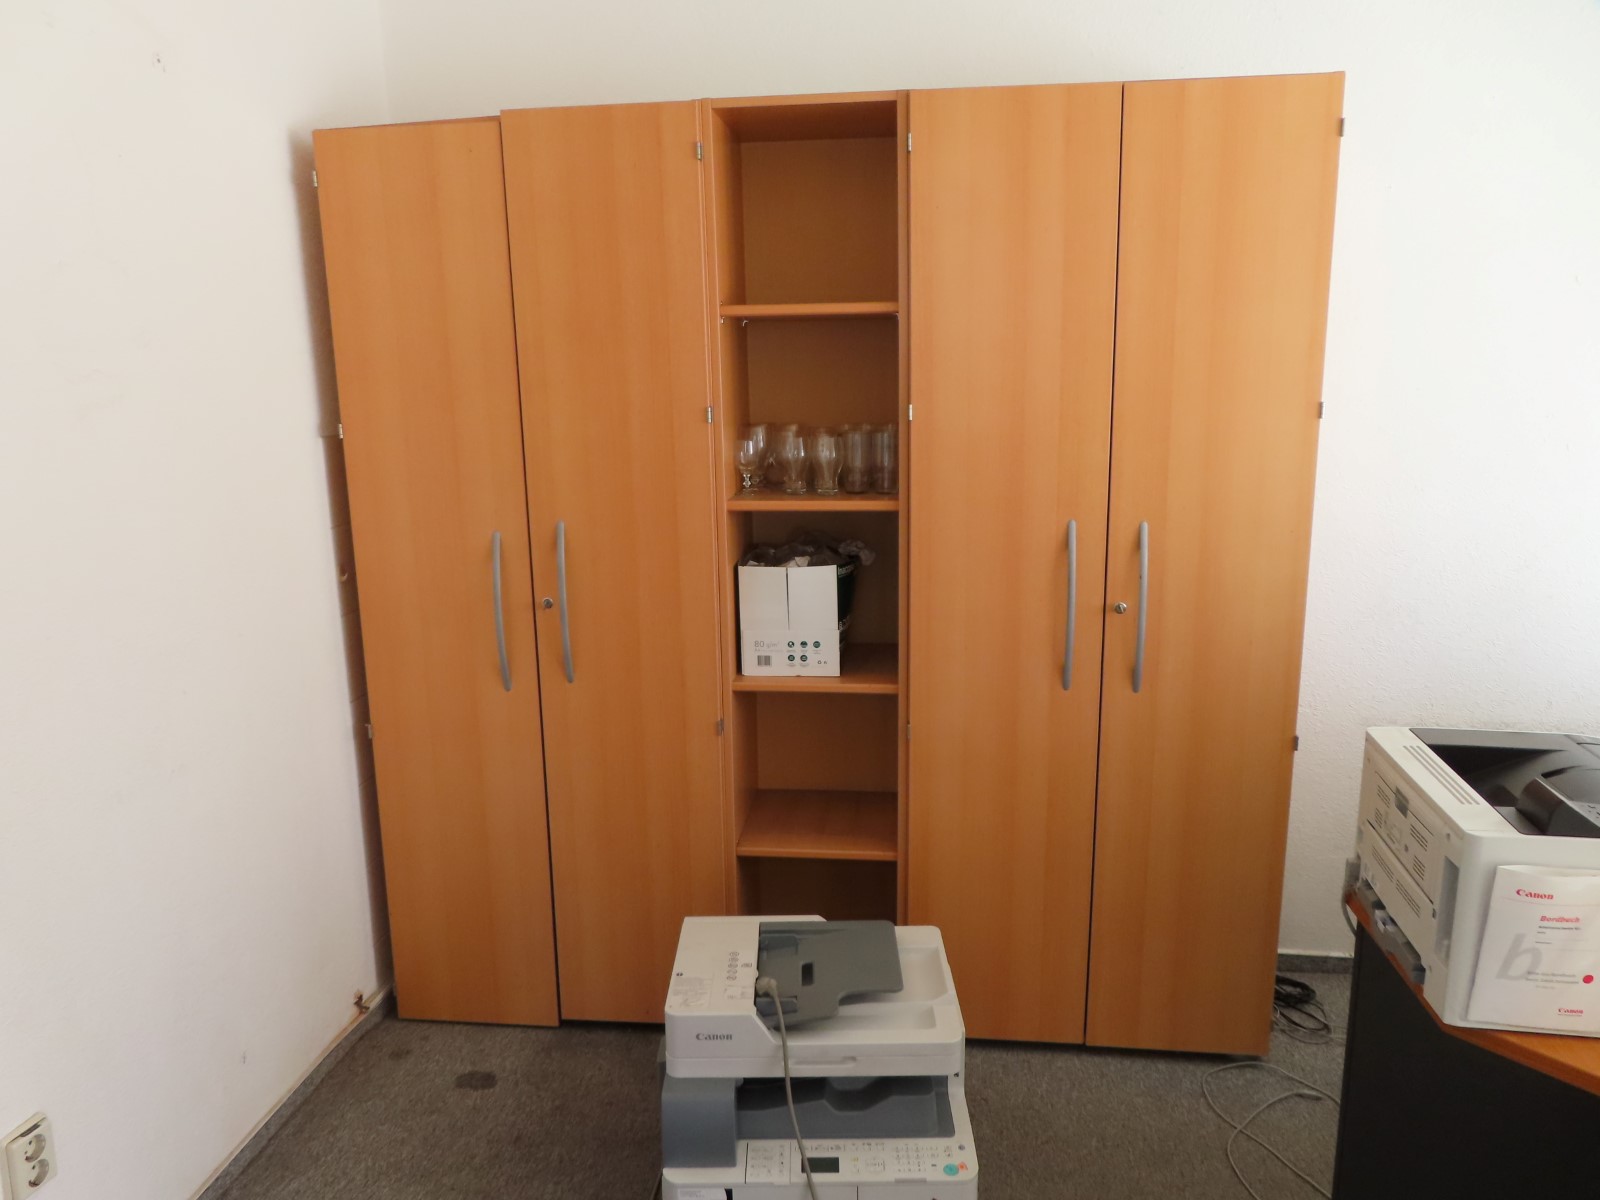 Lot of office furniture